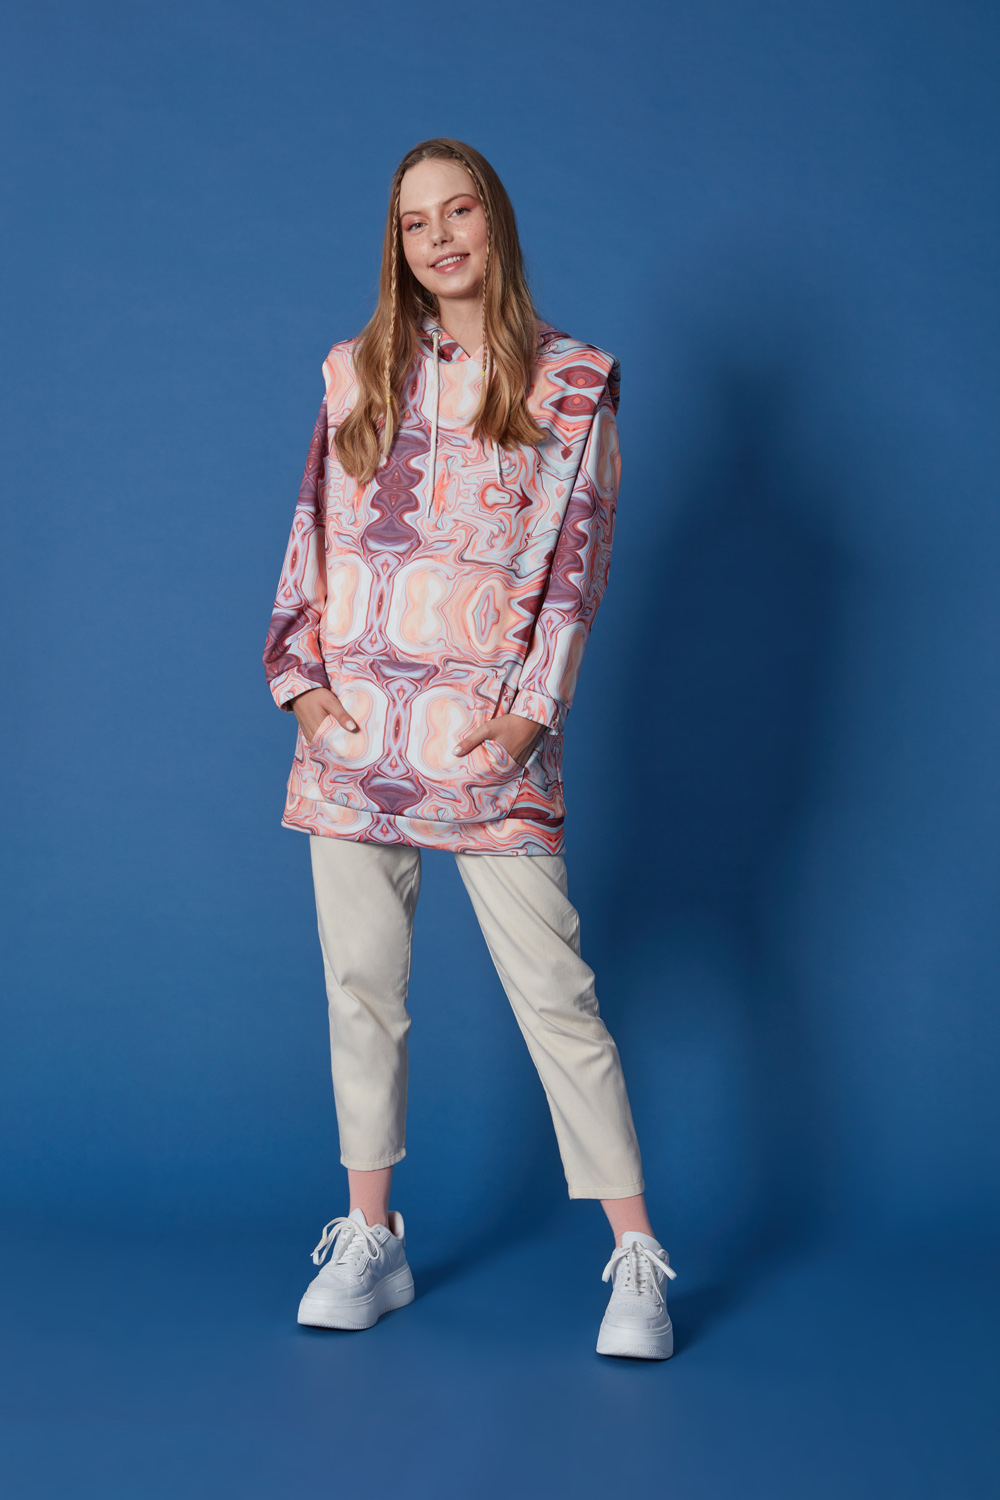 Hooded Patterned Sweatshirt with Shoulder Pads